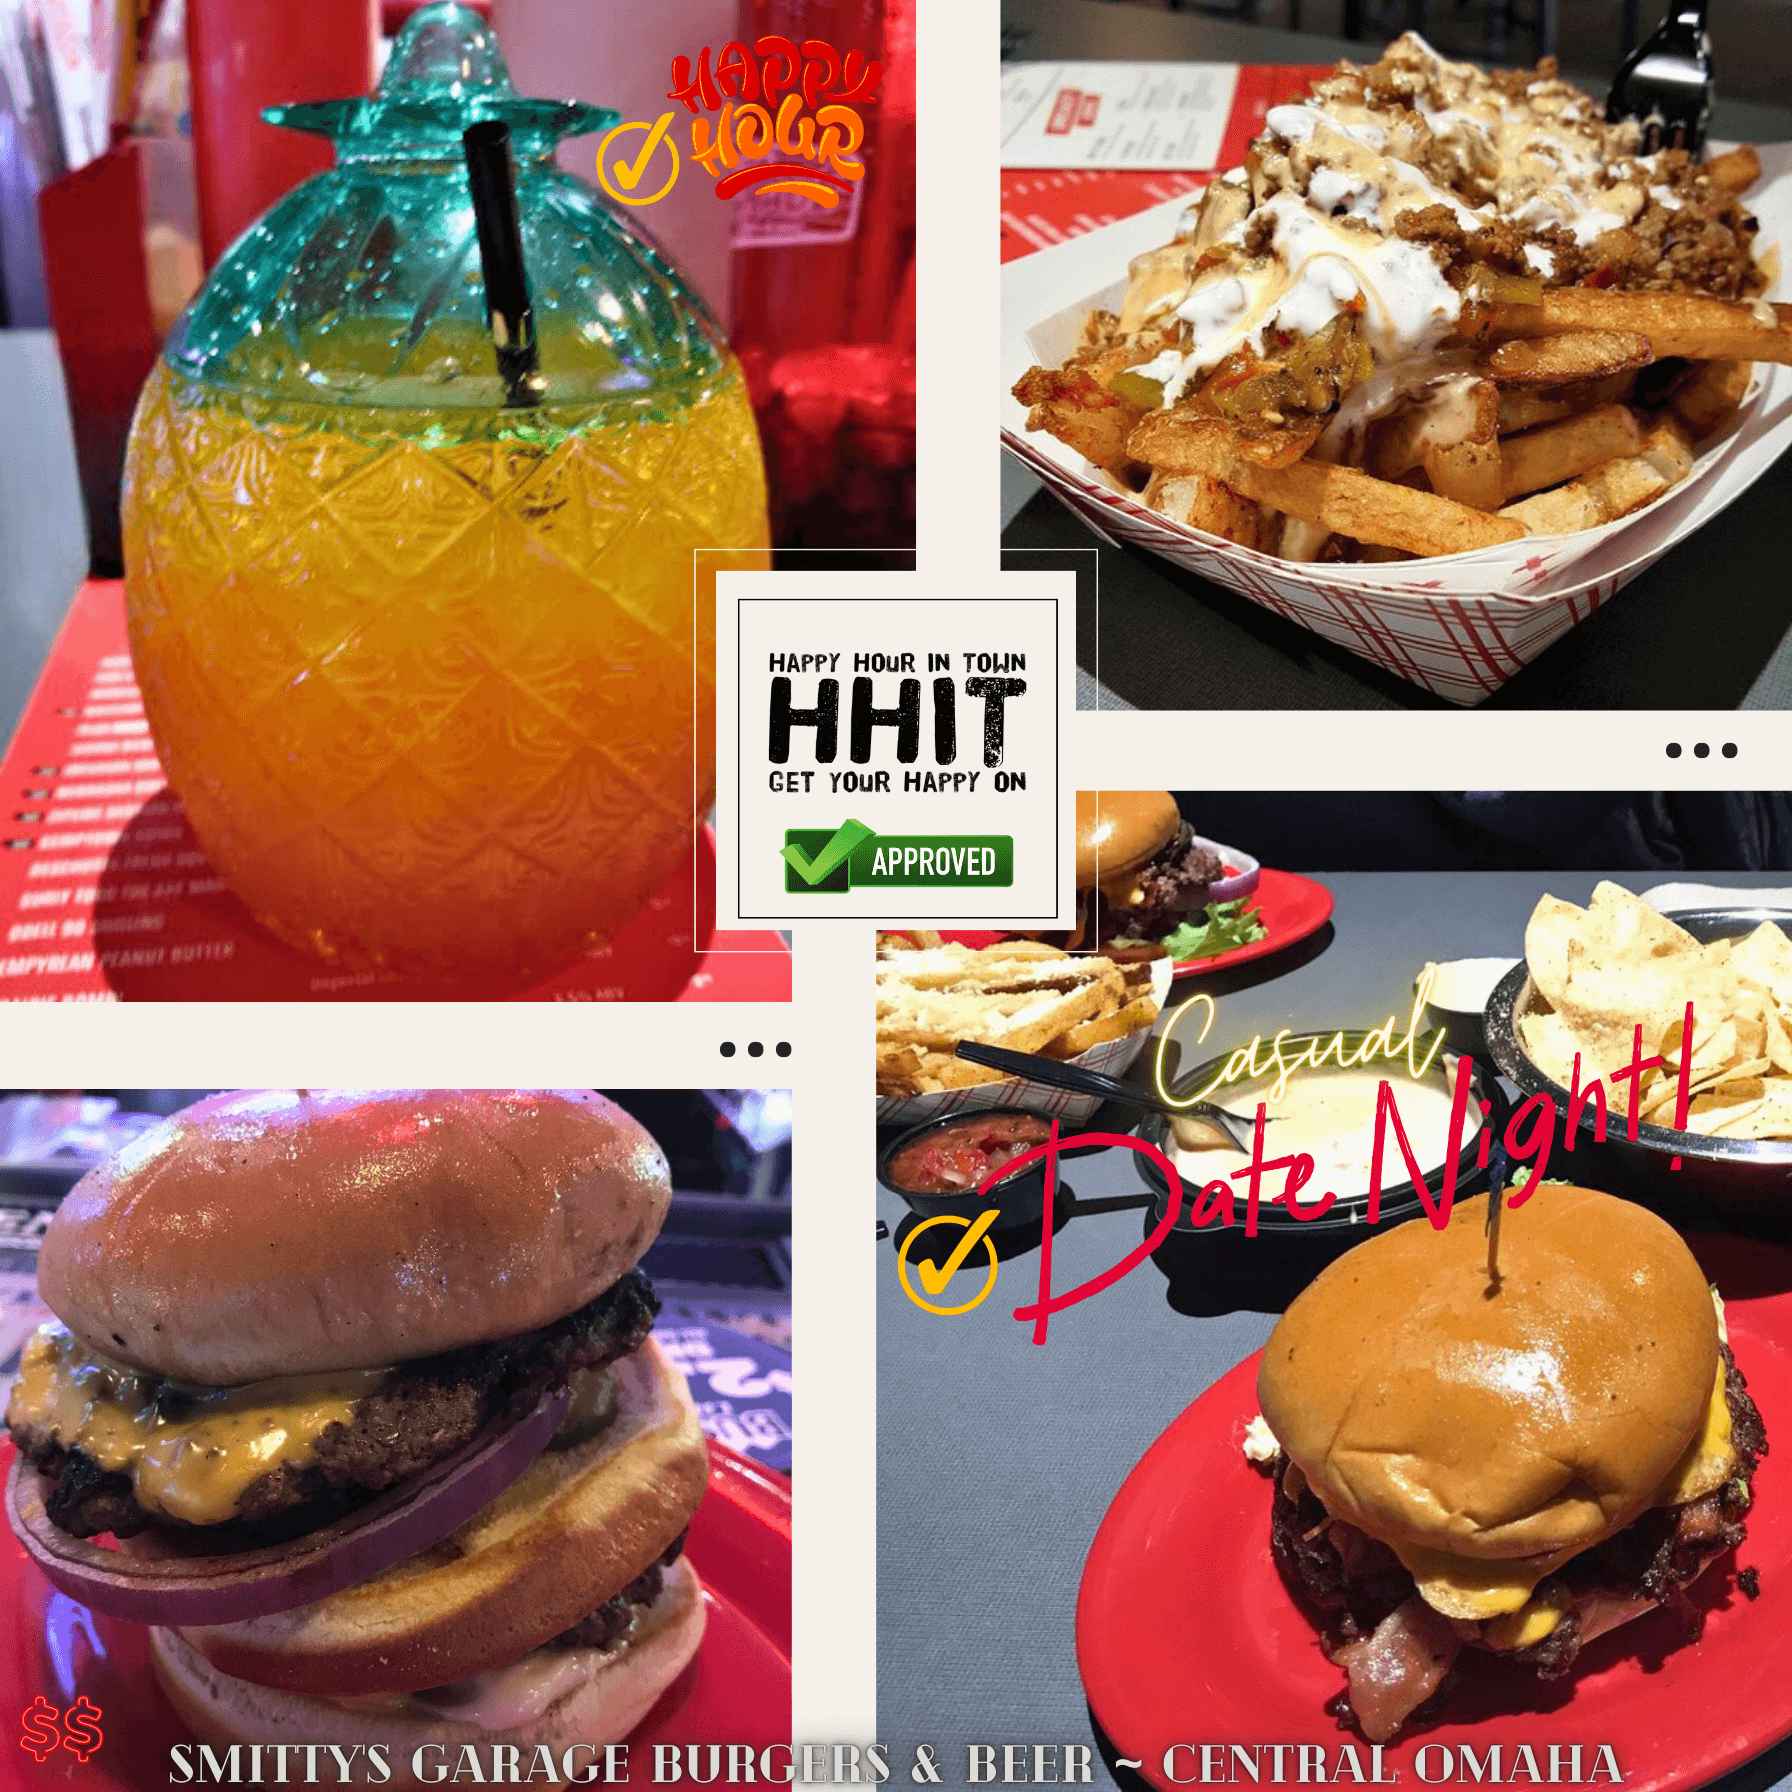 Smitty's Garage Burgers and Beer Omaha Happy Hour In Town